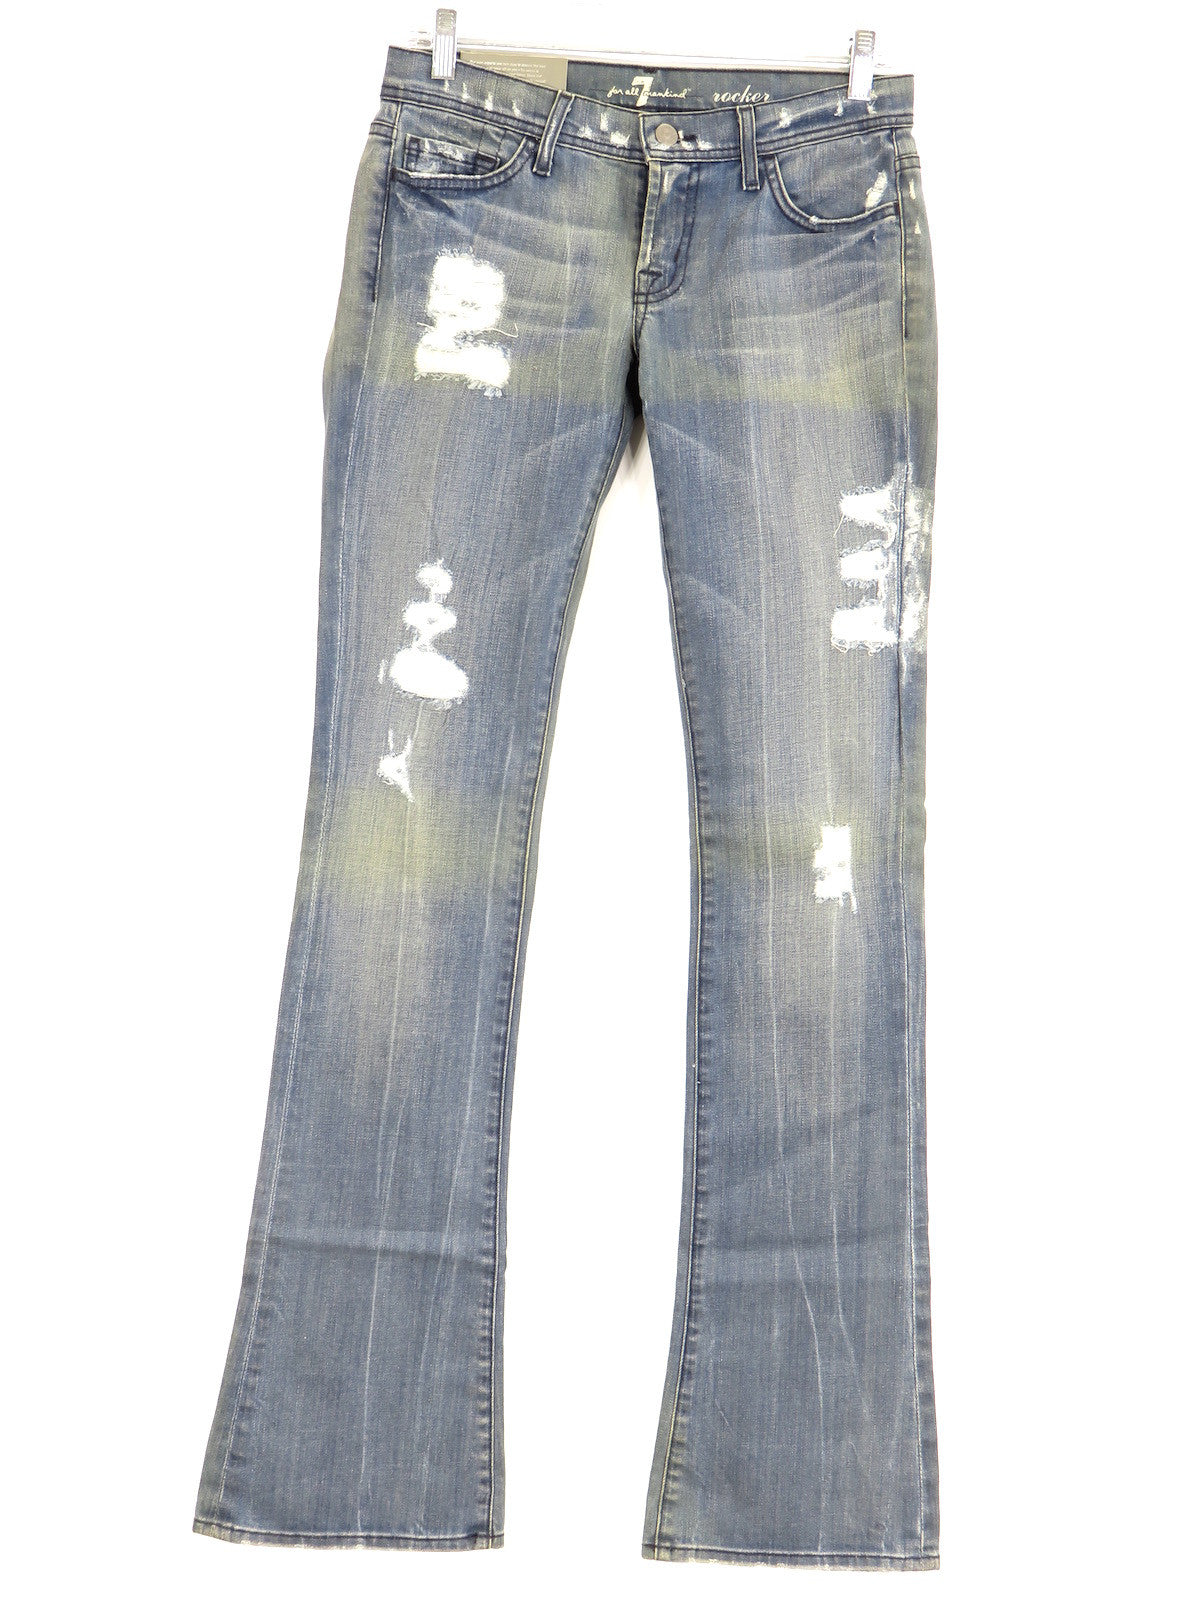 7 for all mankind rocker jeans